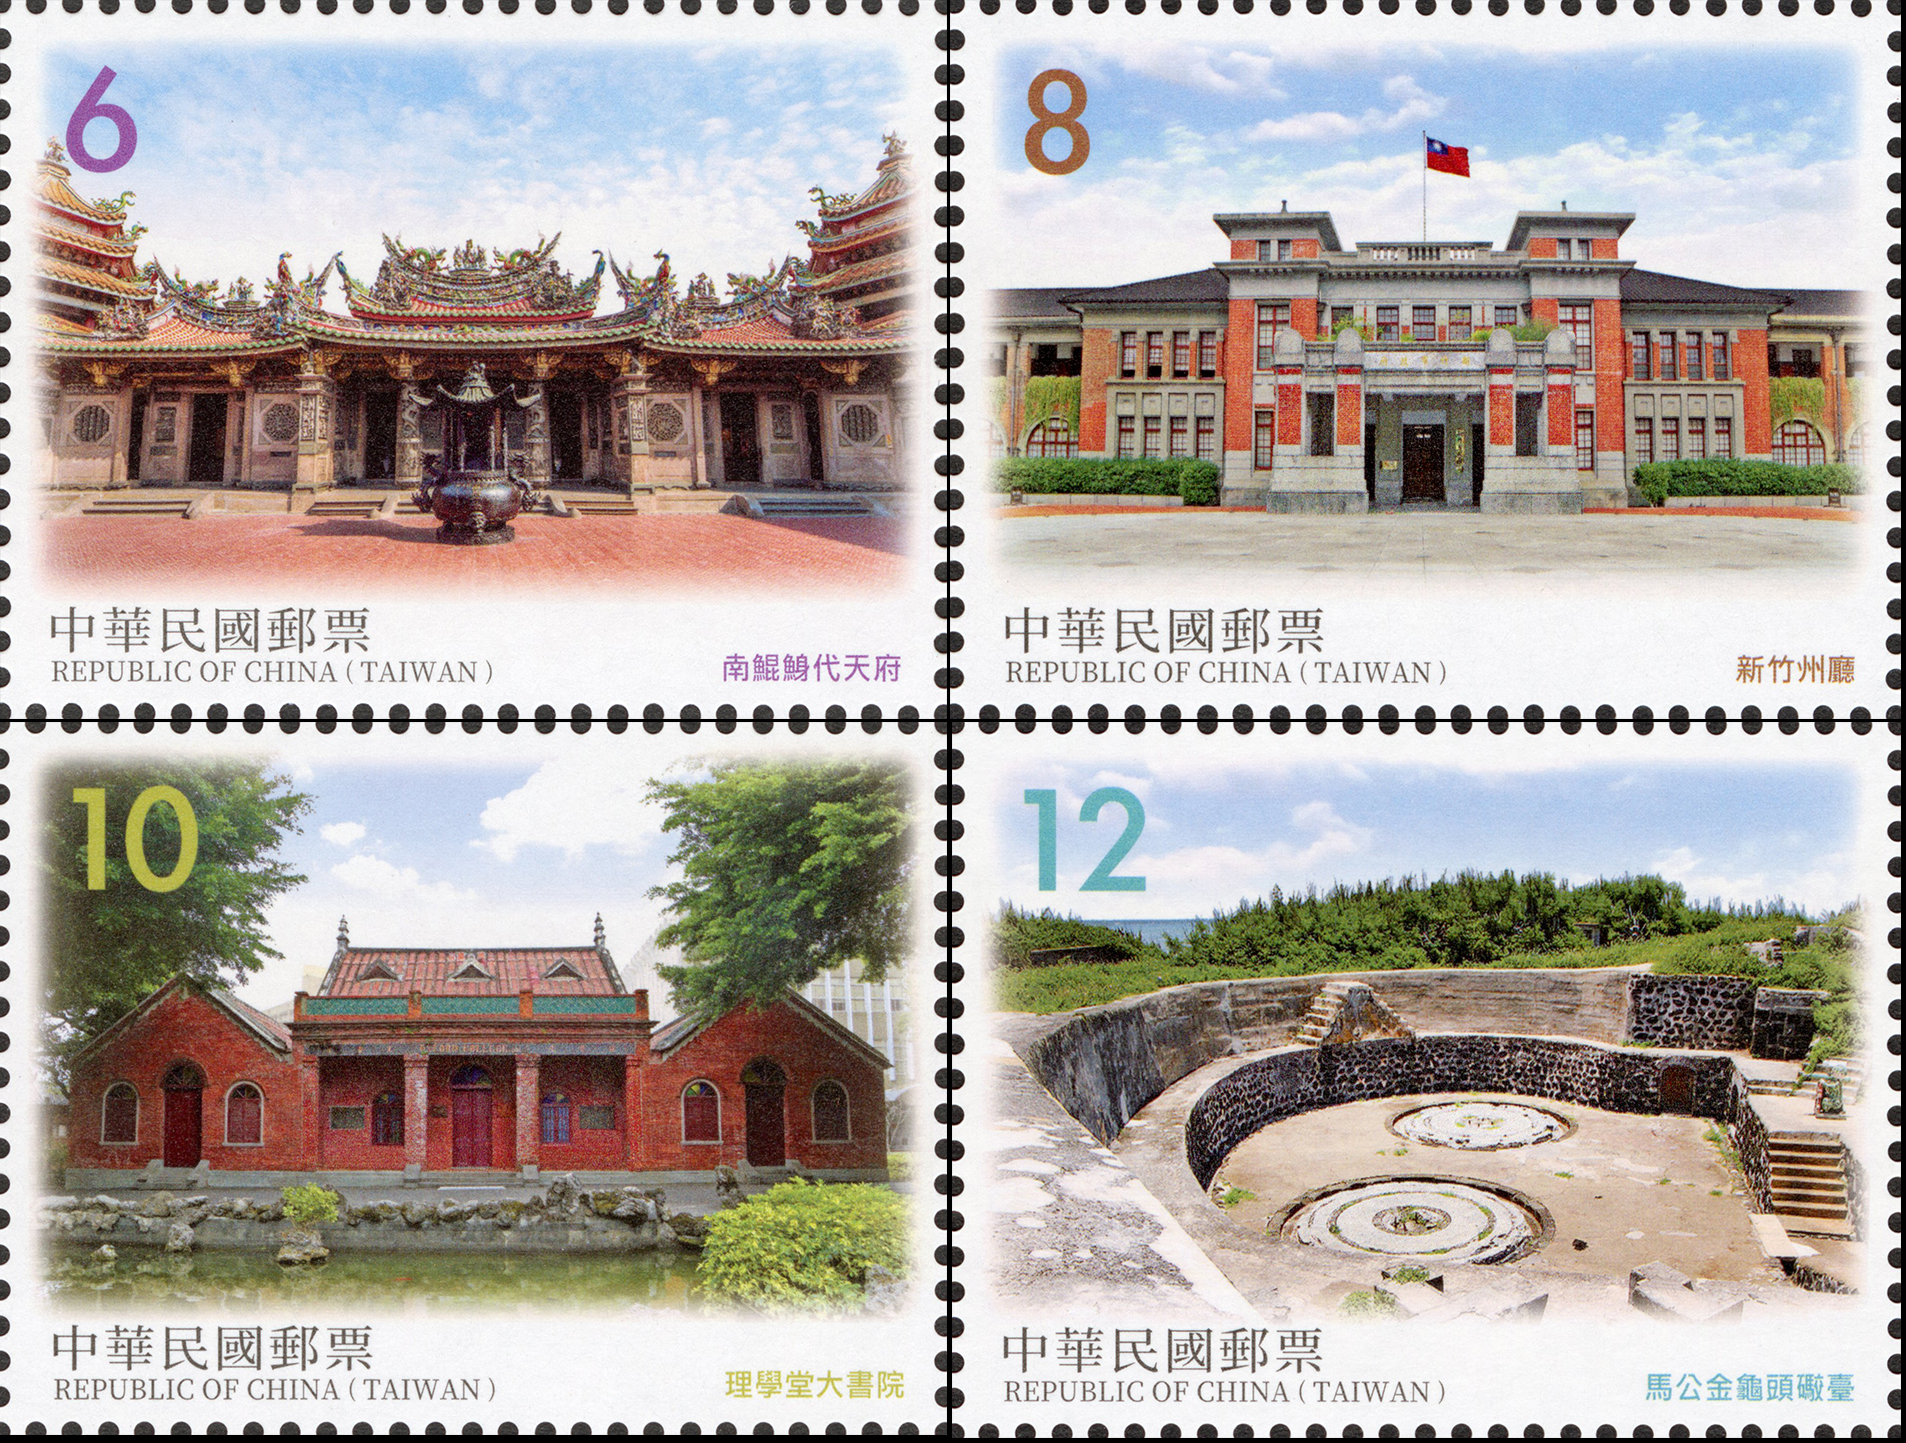 Taiwan Relics Postage Stamps (Issue of 2021)